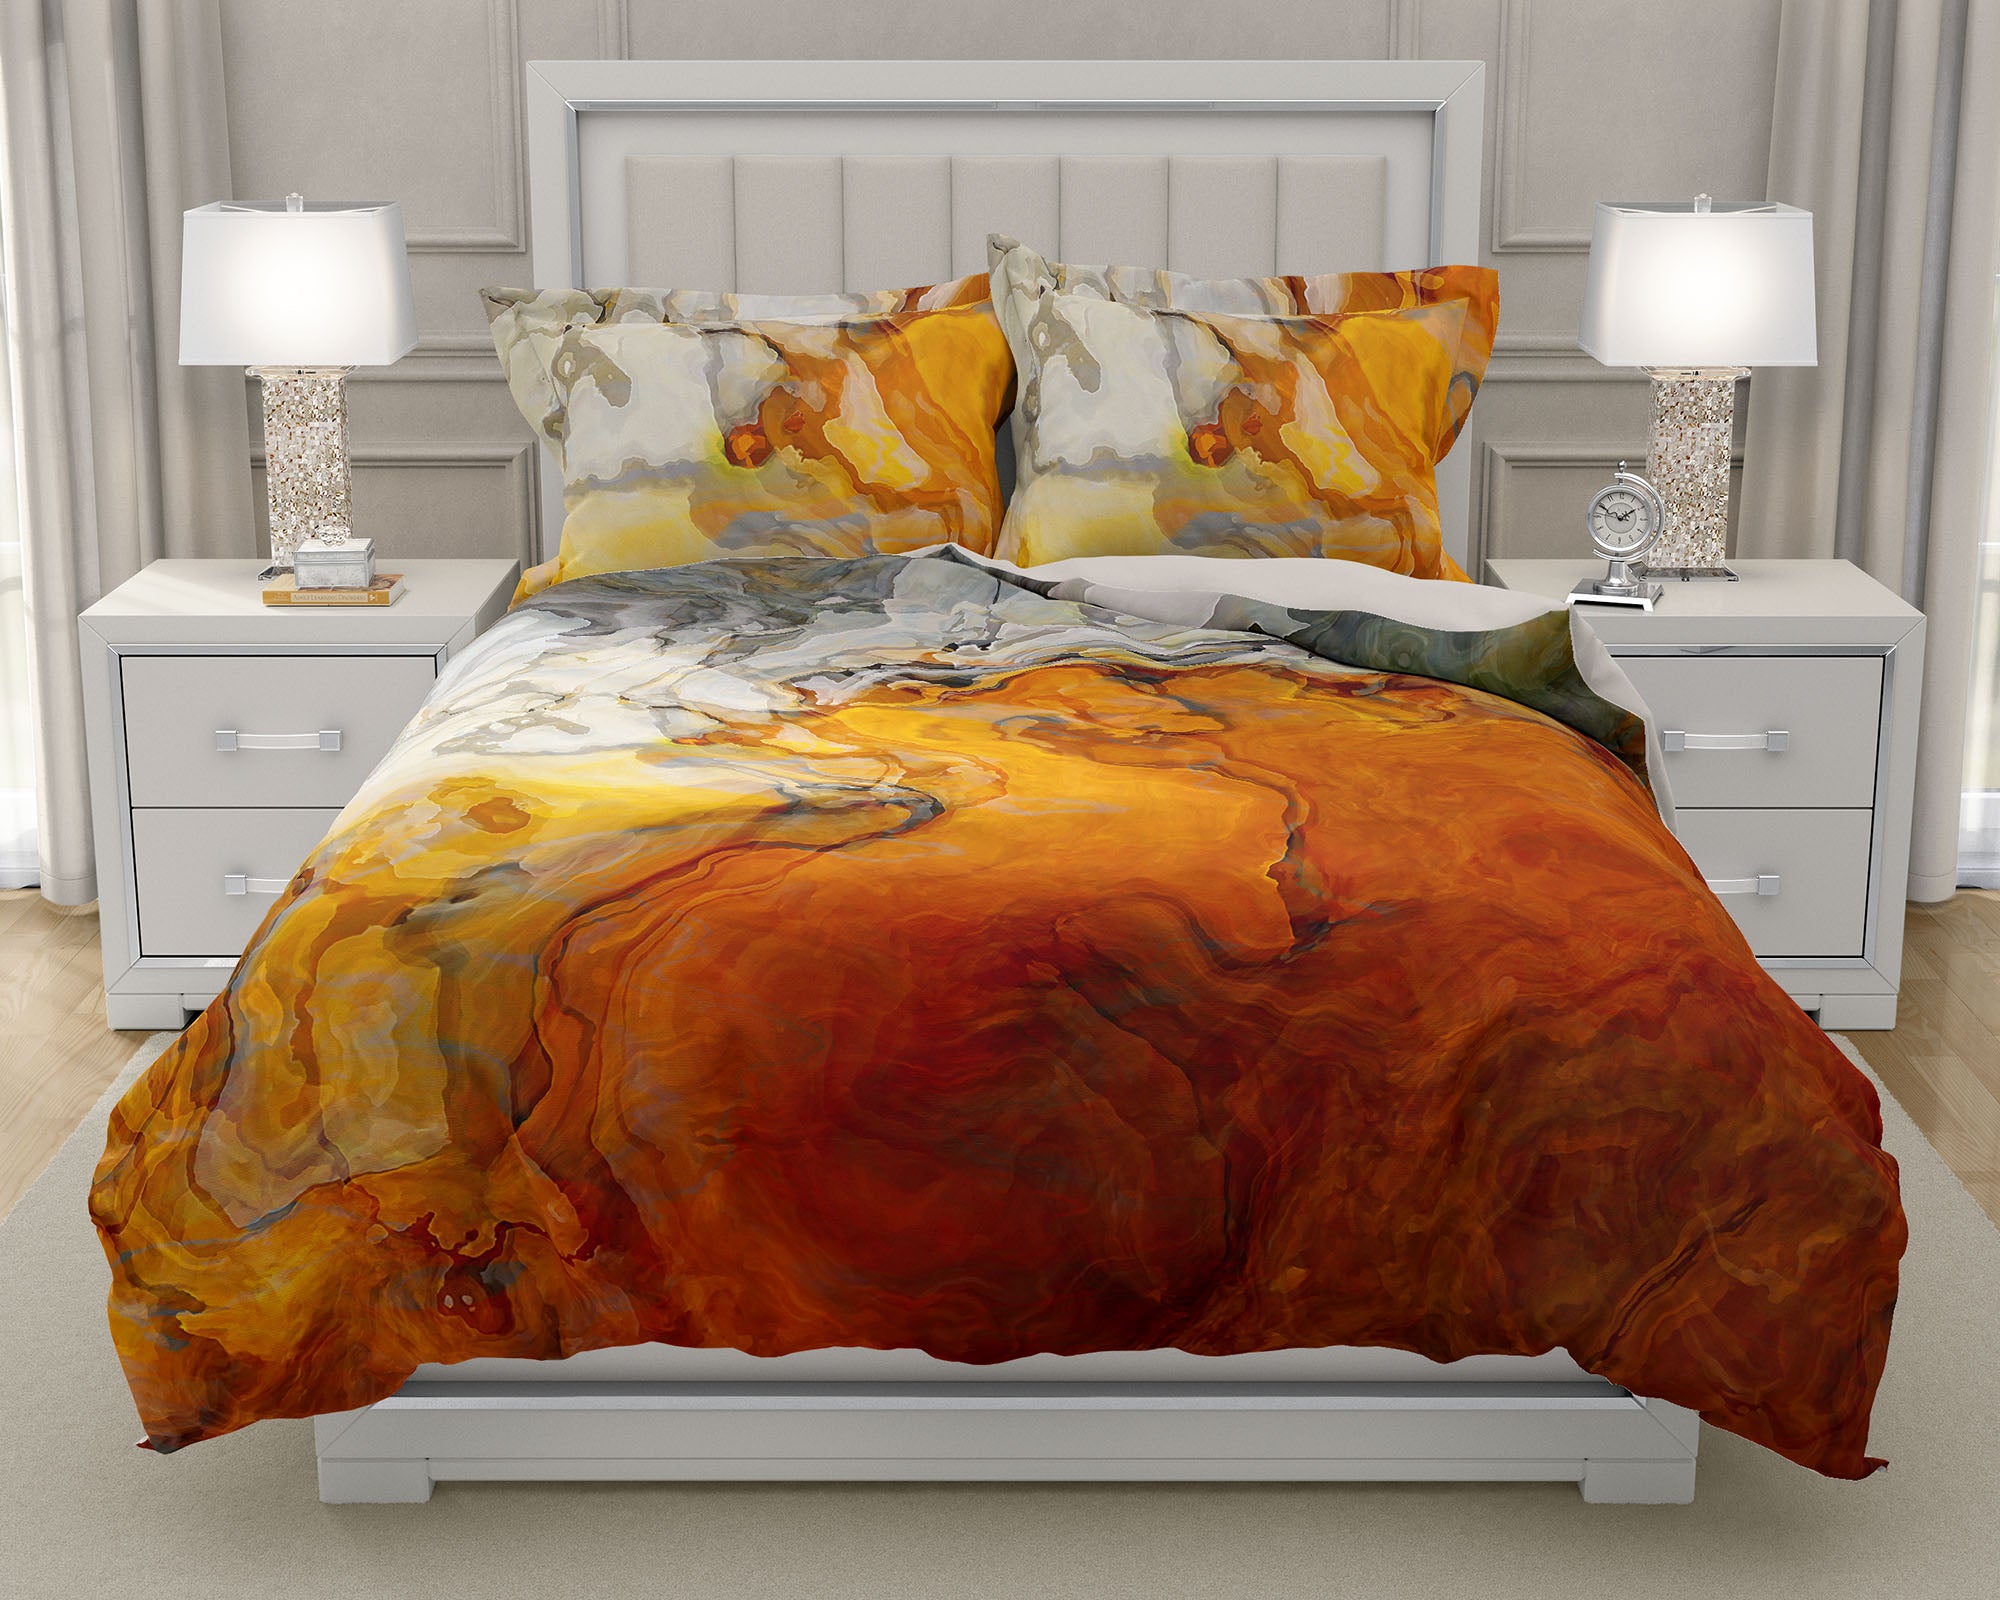 Duvet Cover With Abstract Art King Or Queen In Orange White And